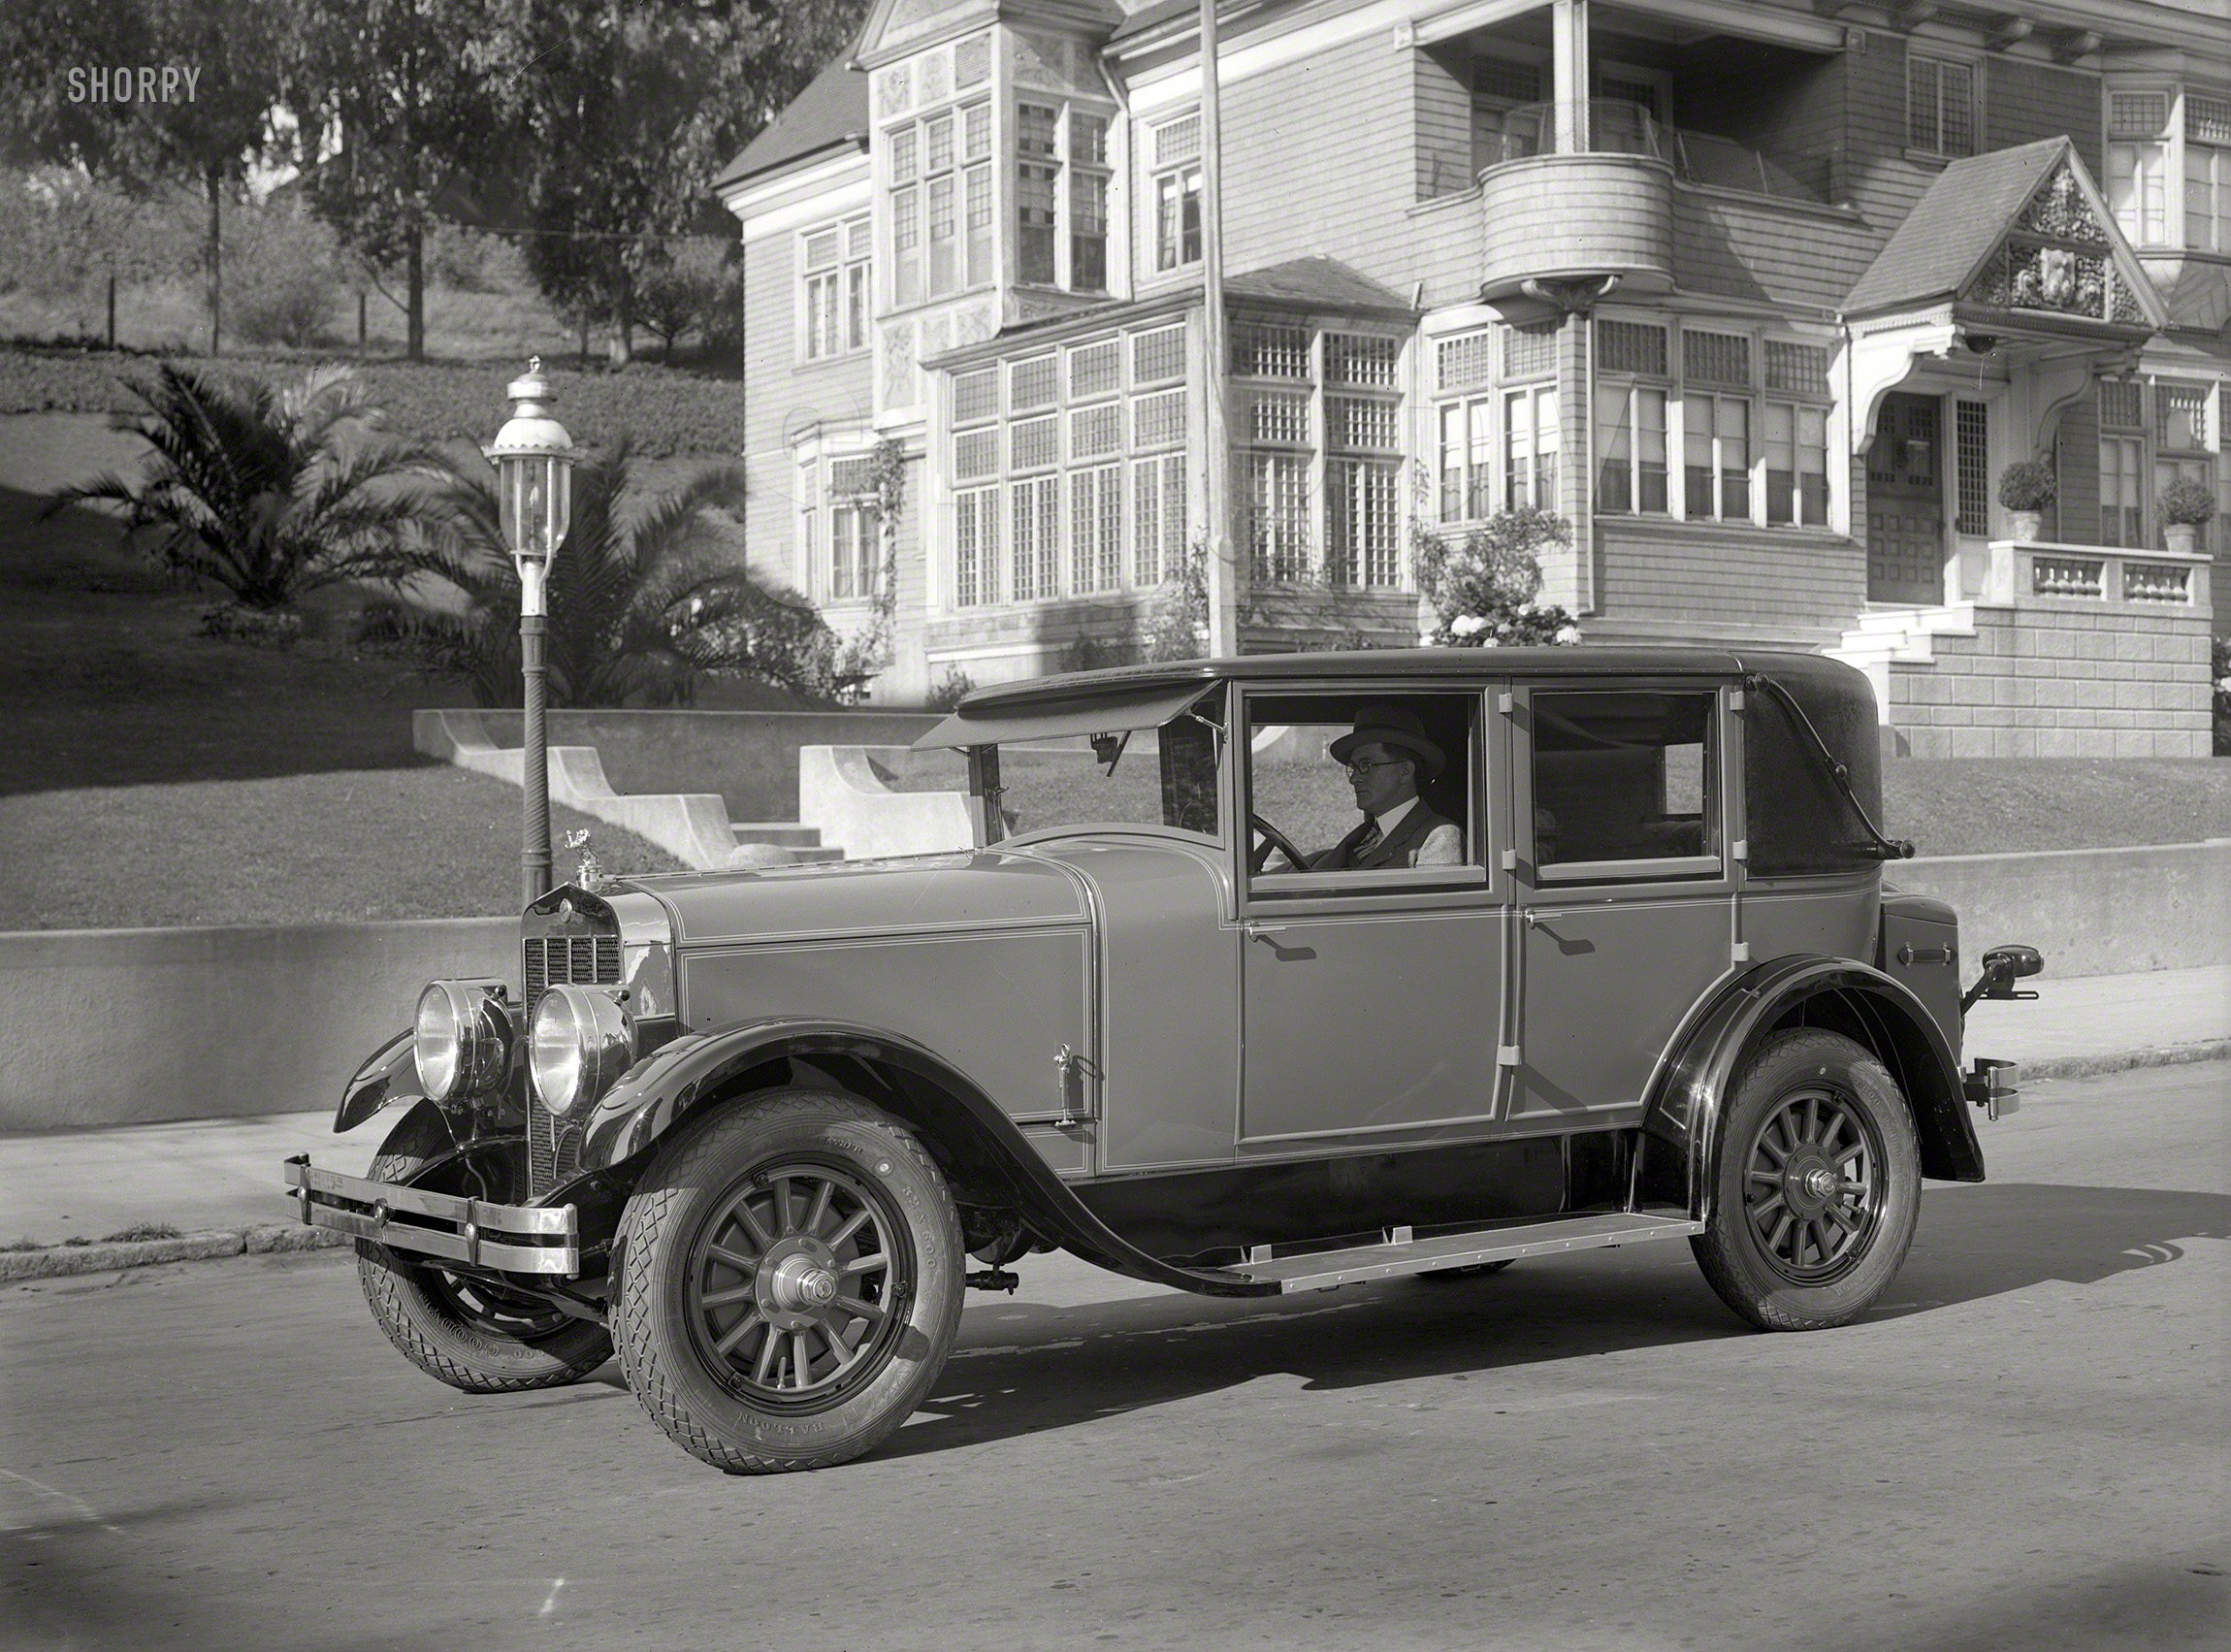 "Franklin sedan, San Francisco, 1927." An upscale auto parked outside an imposing home whose balcony seems to have been modified for keeping chickens or children. 5x7 glass inch negative by Christopher Helin. View full size.